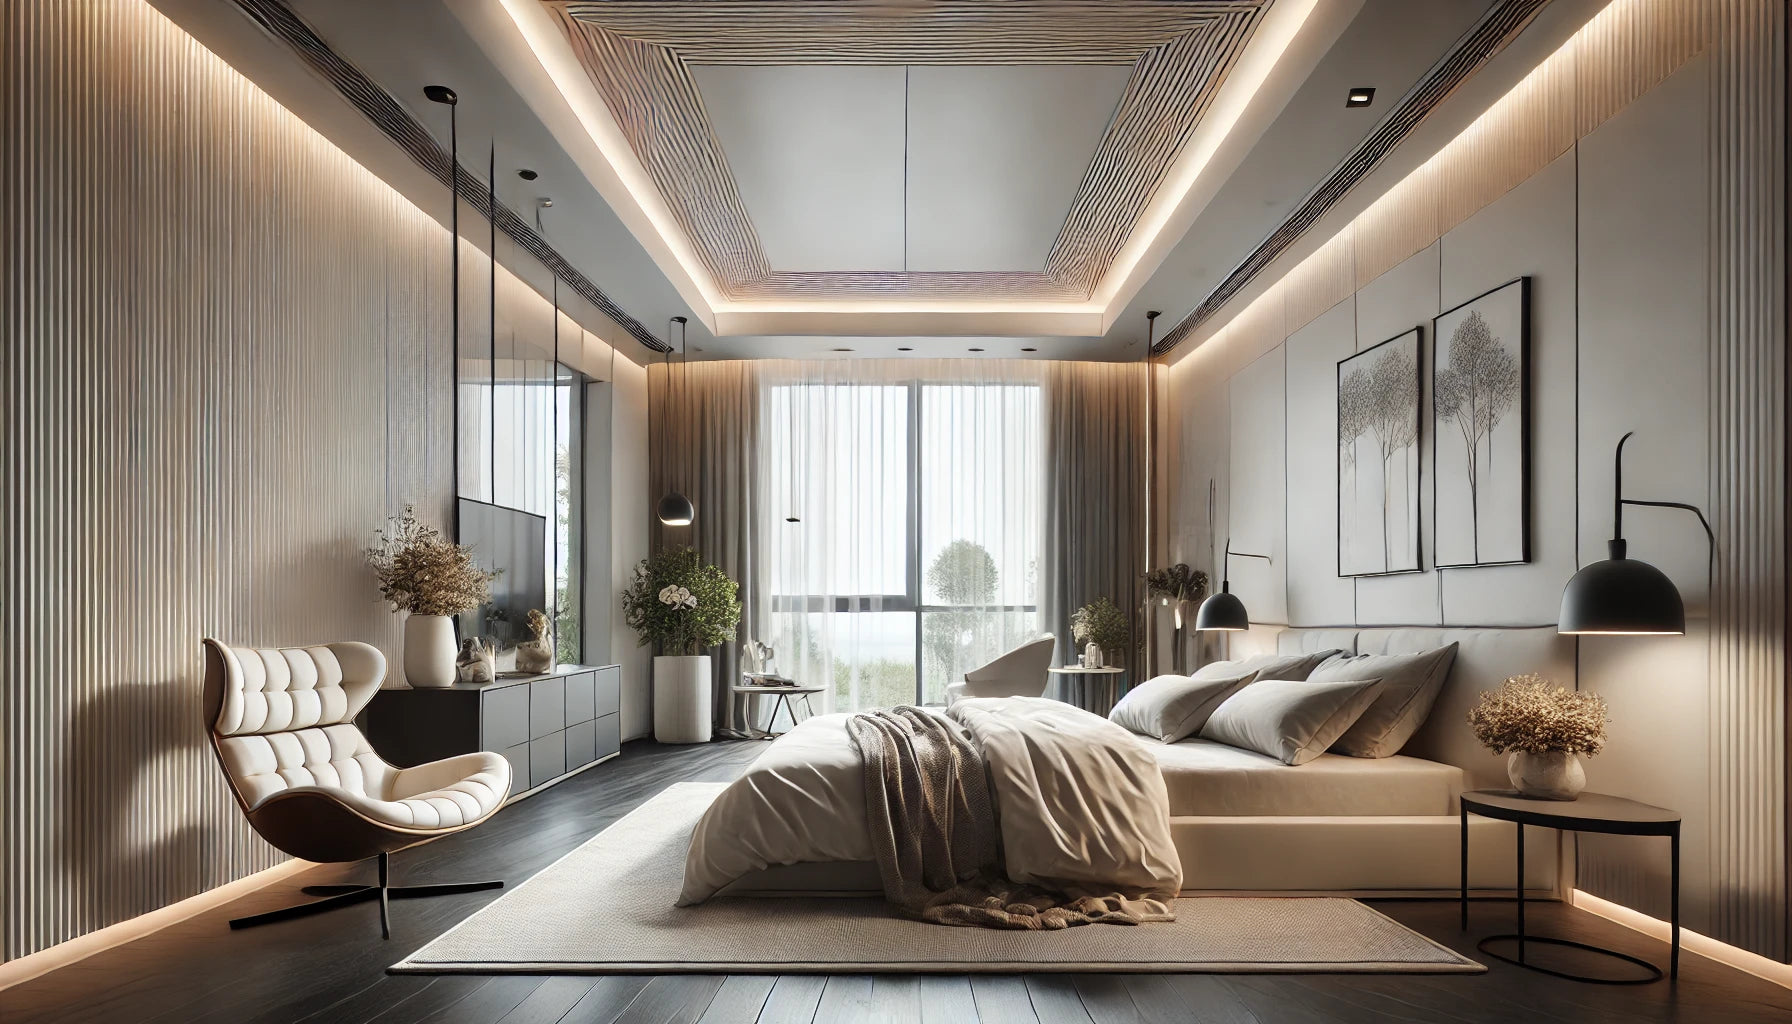 Maintaining a Flawless Ceiling: The BAC-RMD Aesthetic Access Door for Bedrooms